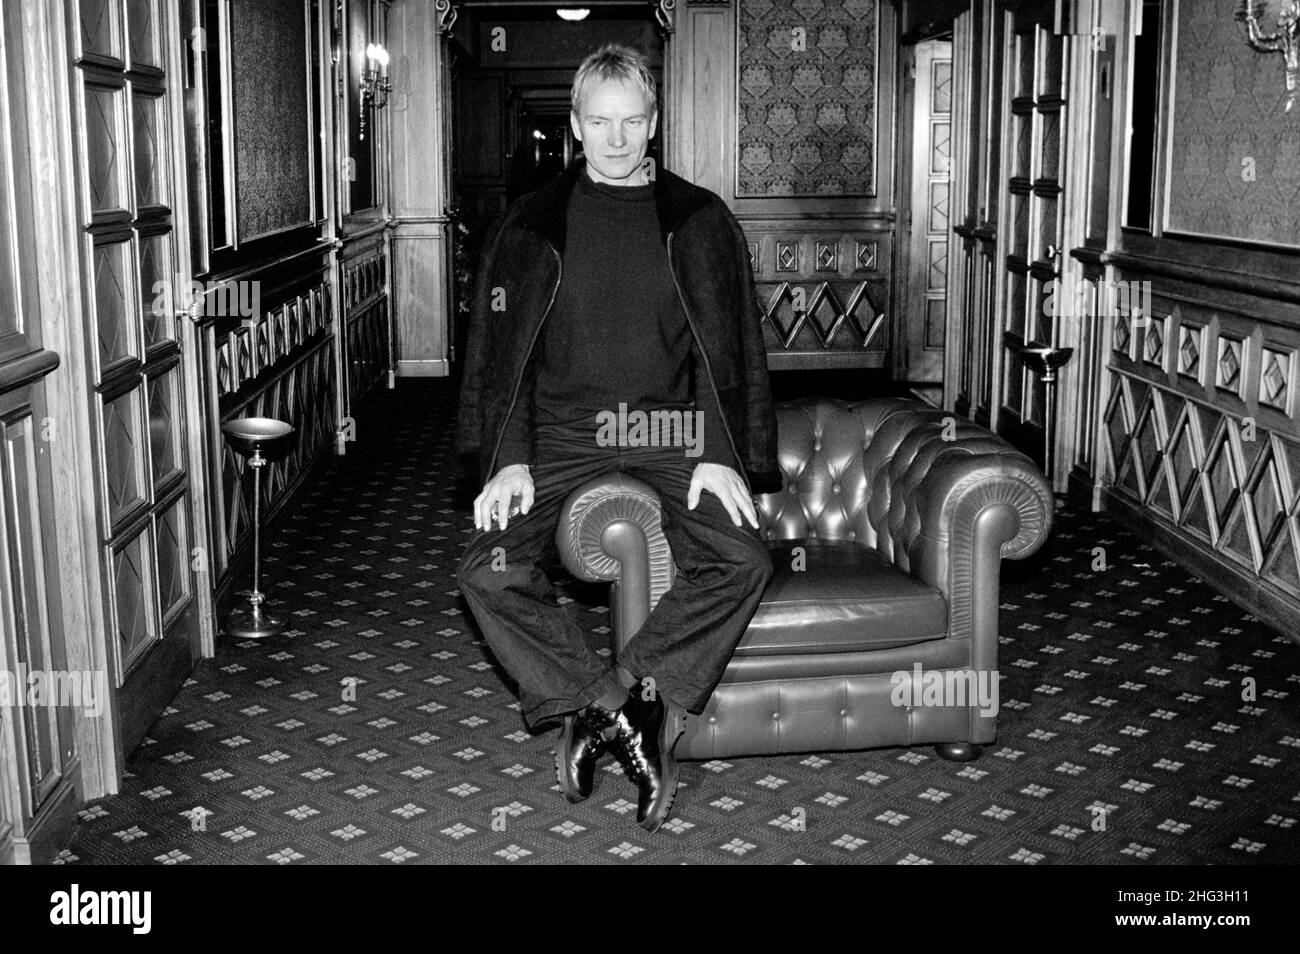 Milan  Italy  1999-12-17 :Sting during a photo session before the press conference at the Hotel Gallia Stock Photo